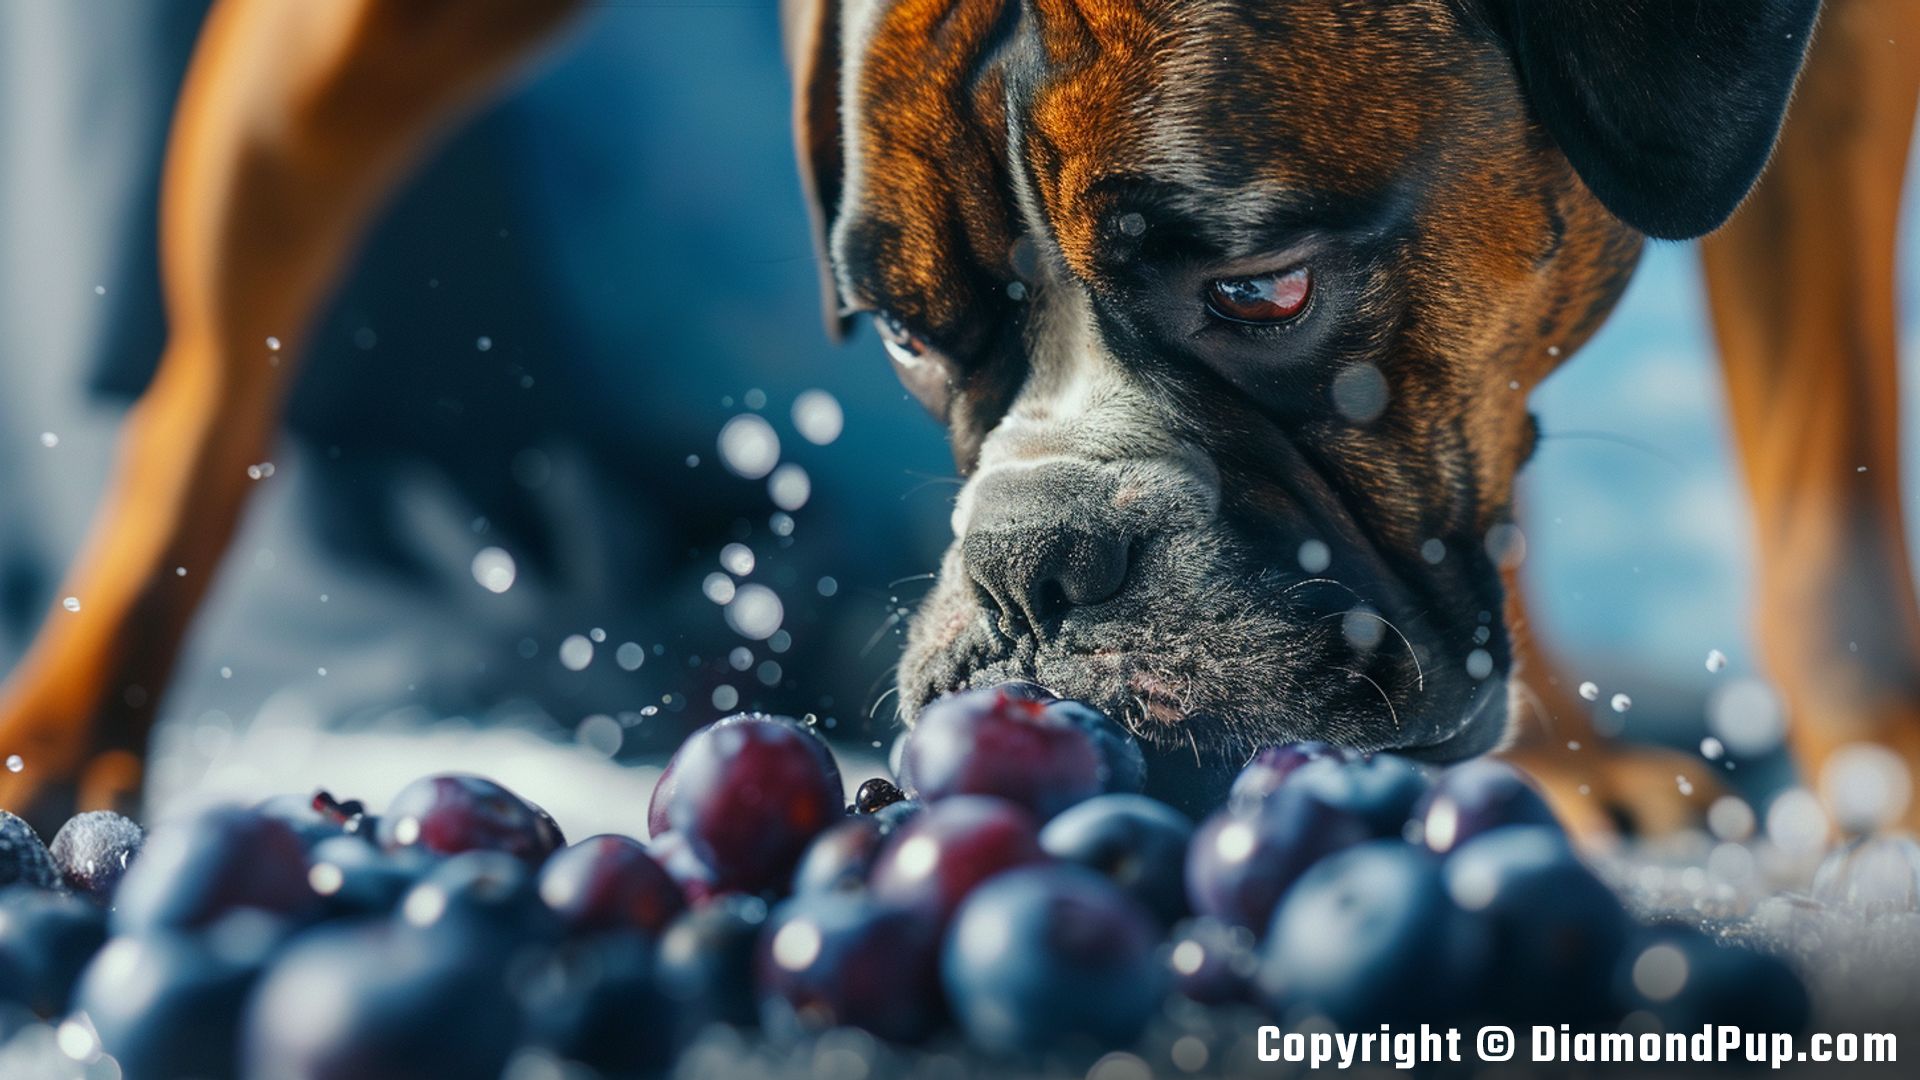 Photograph of Boxer Snacking on Blueberries